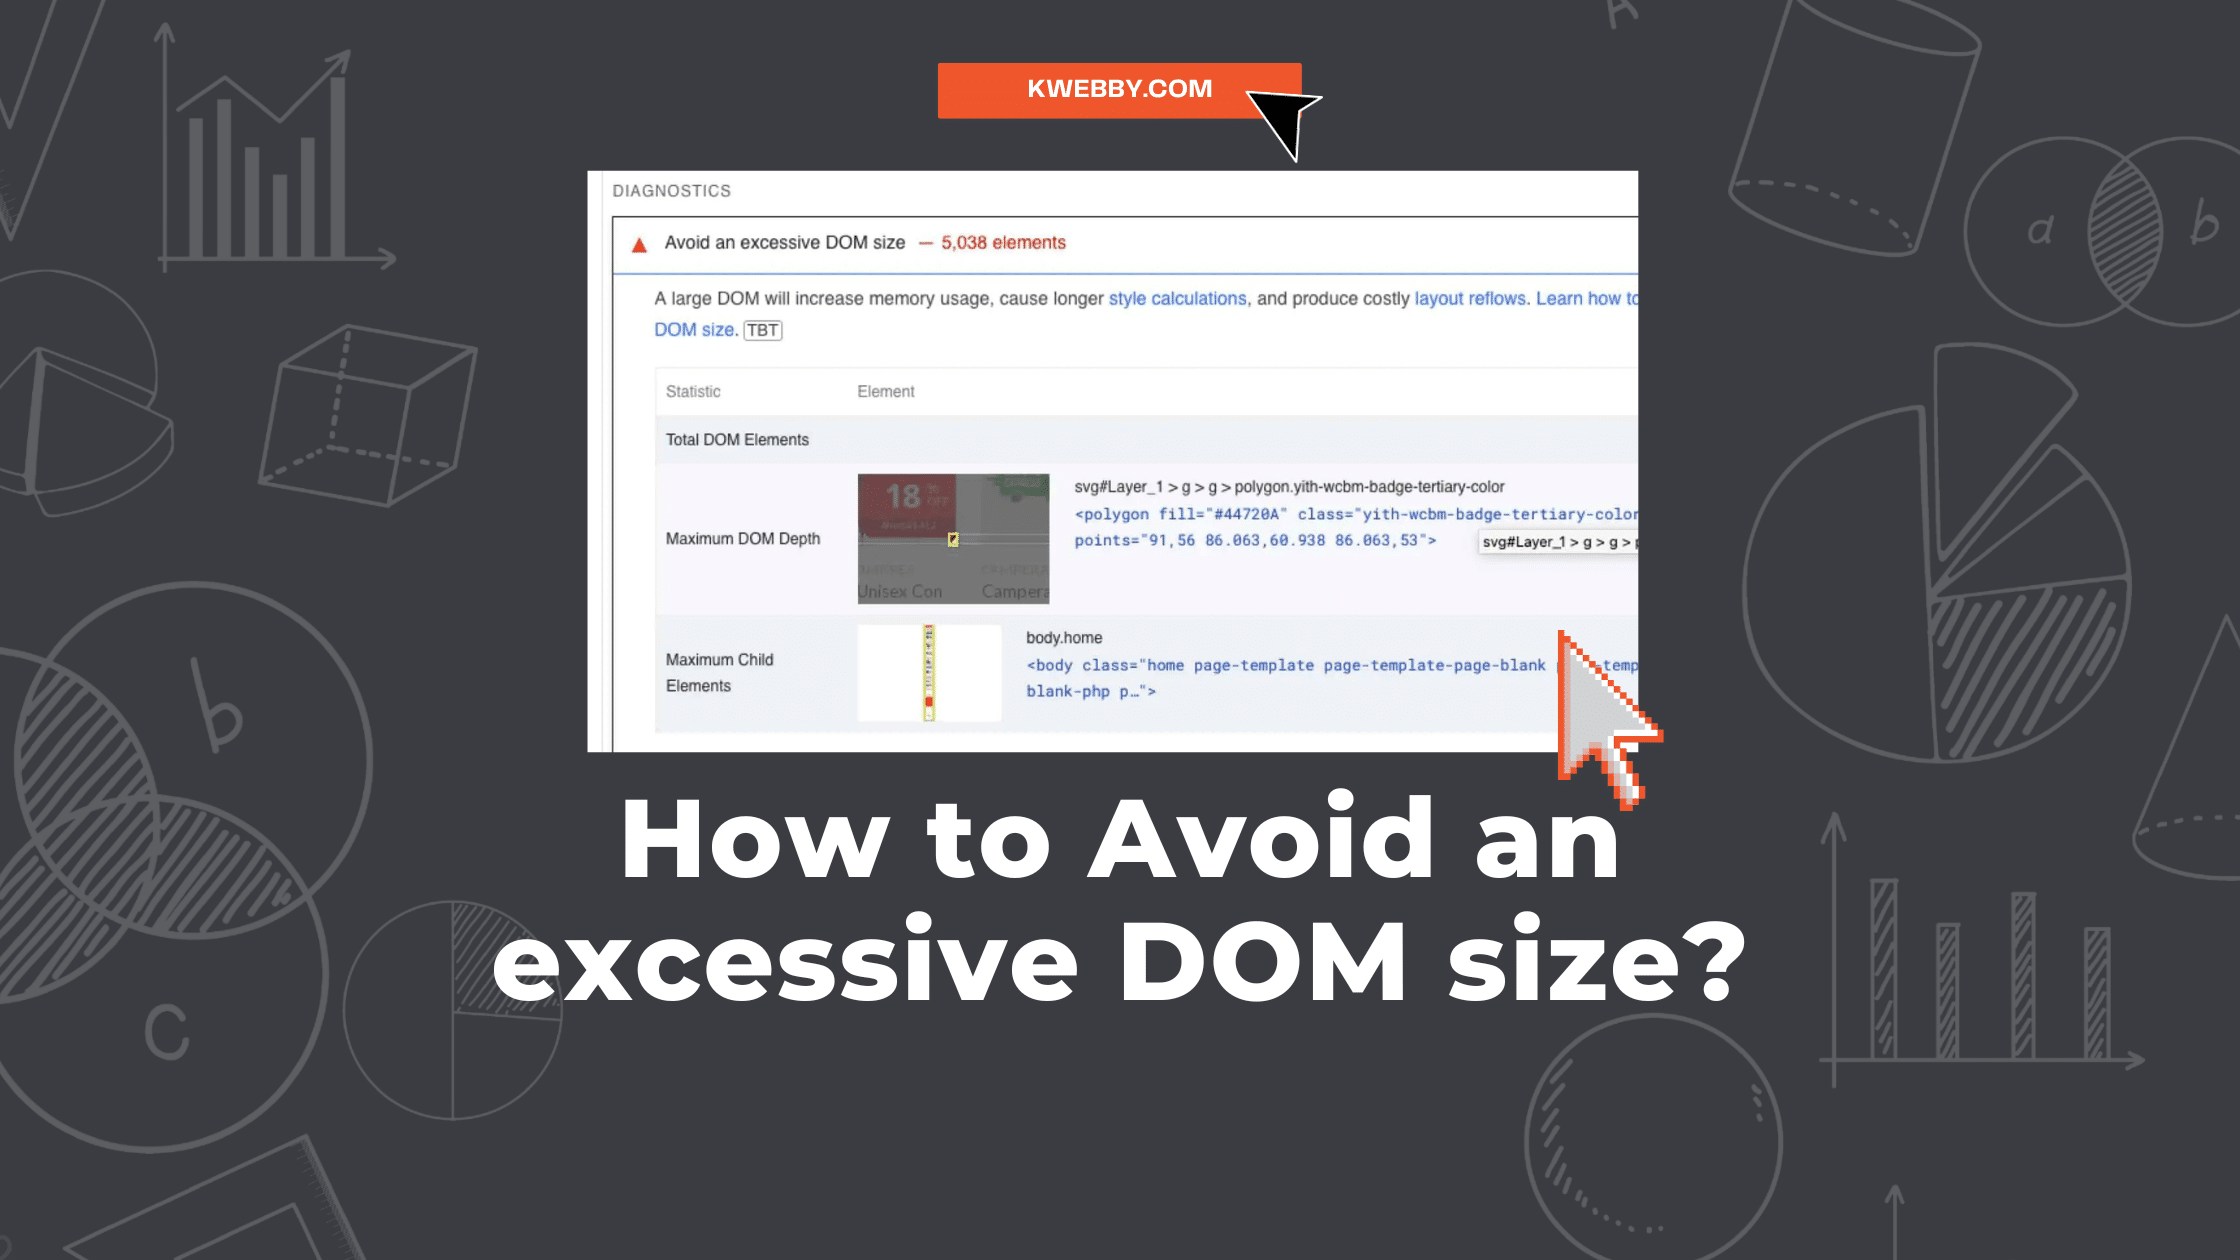 How to Avoid an excessive DOM size?